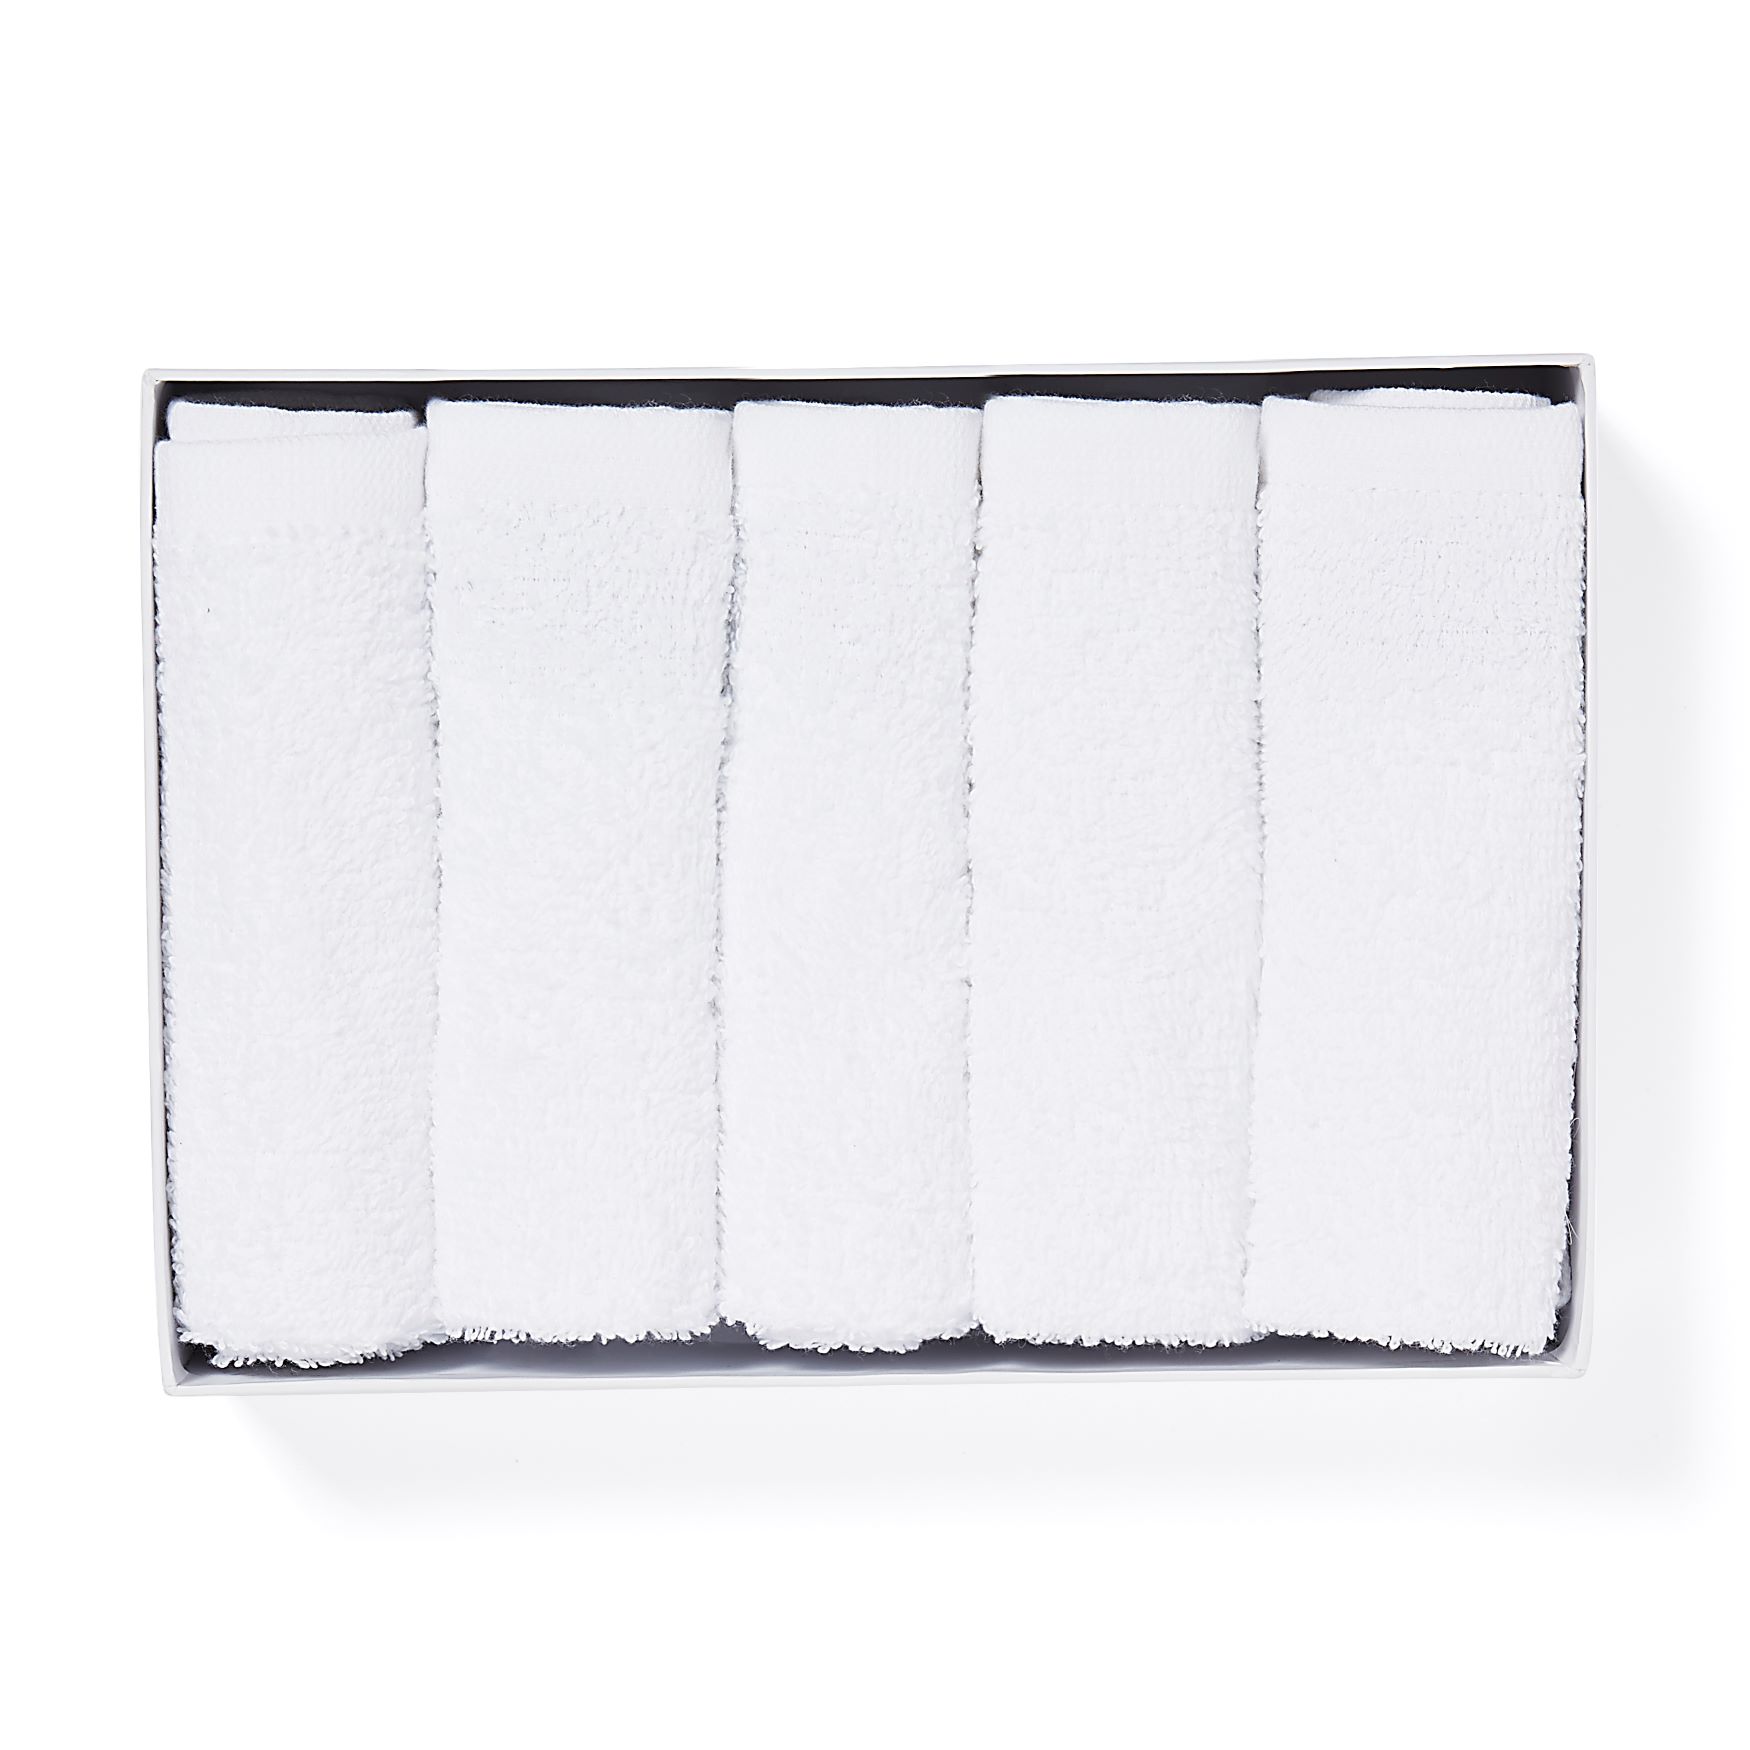 Votary Pack of Five Cotton Face Cloths | Space NK